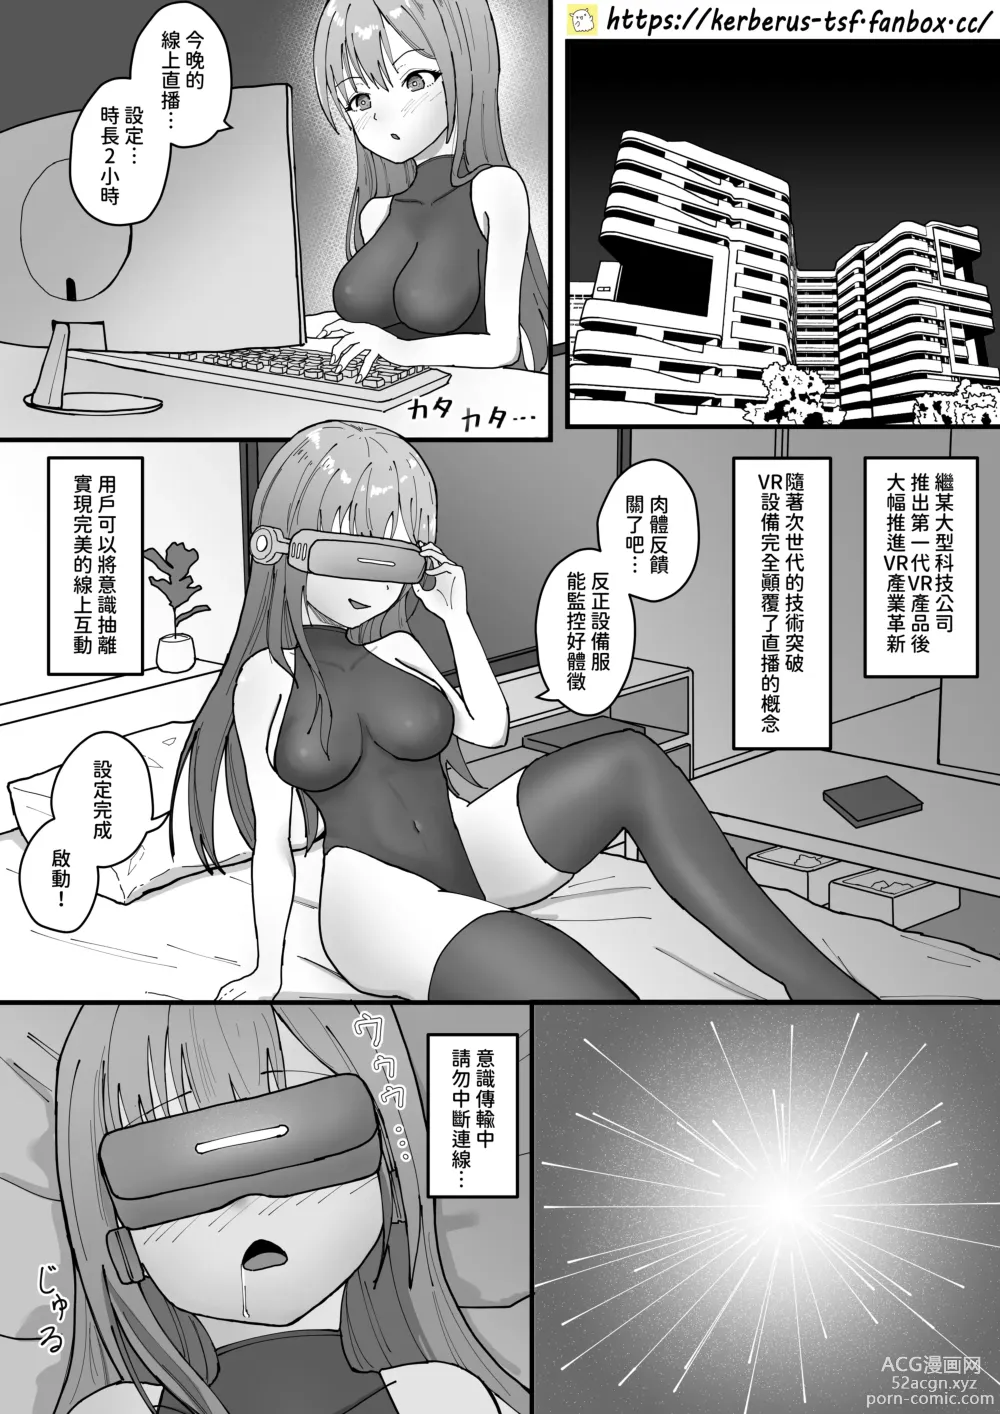 Page 1 of doujinshi VR(Vacancy Replacement) 中文CHN